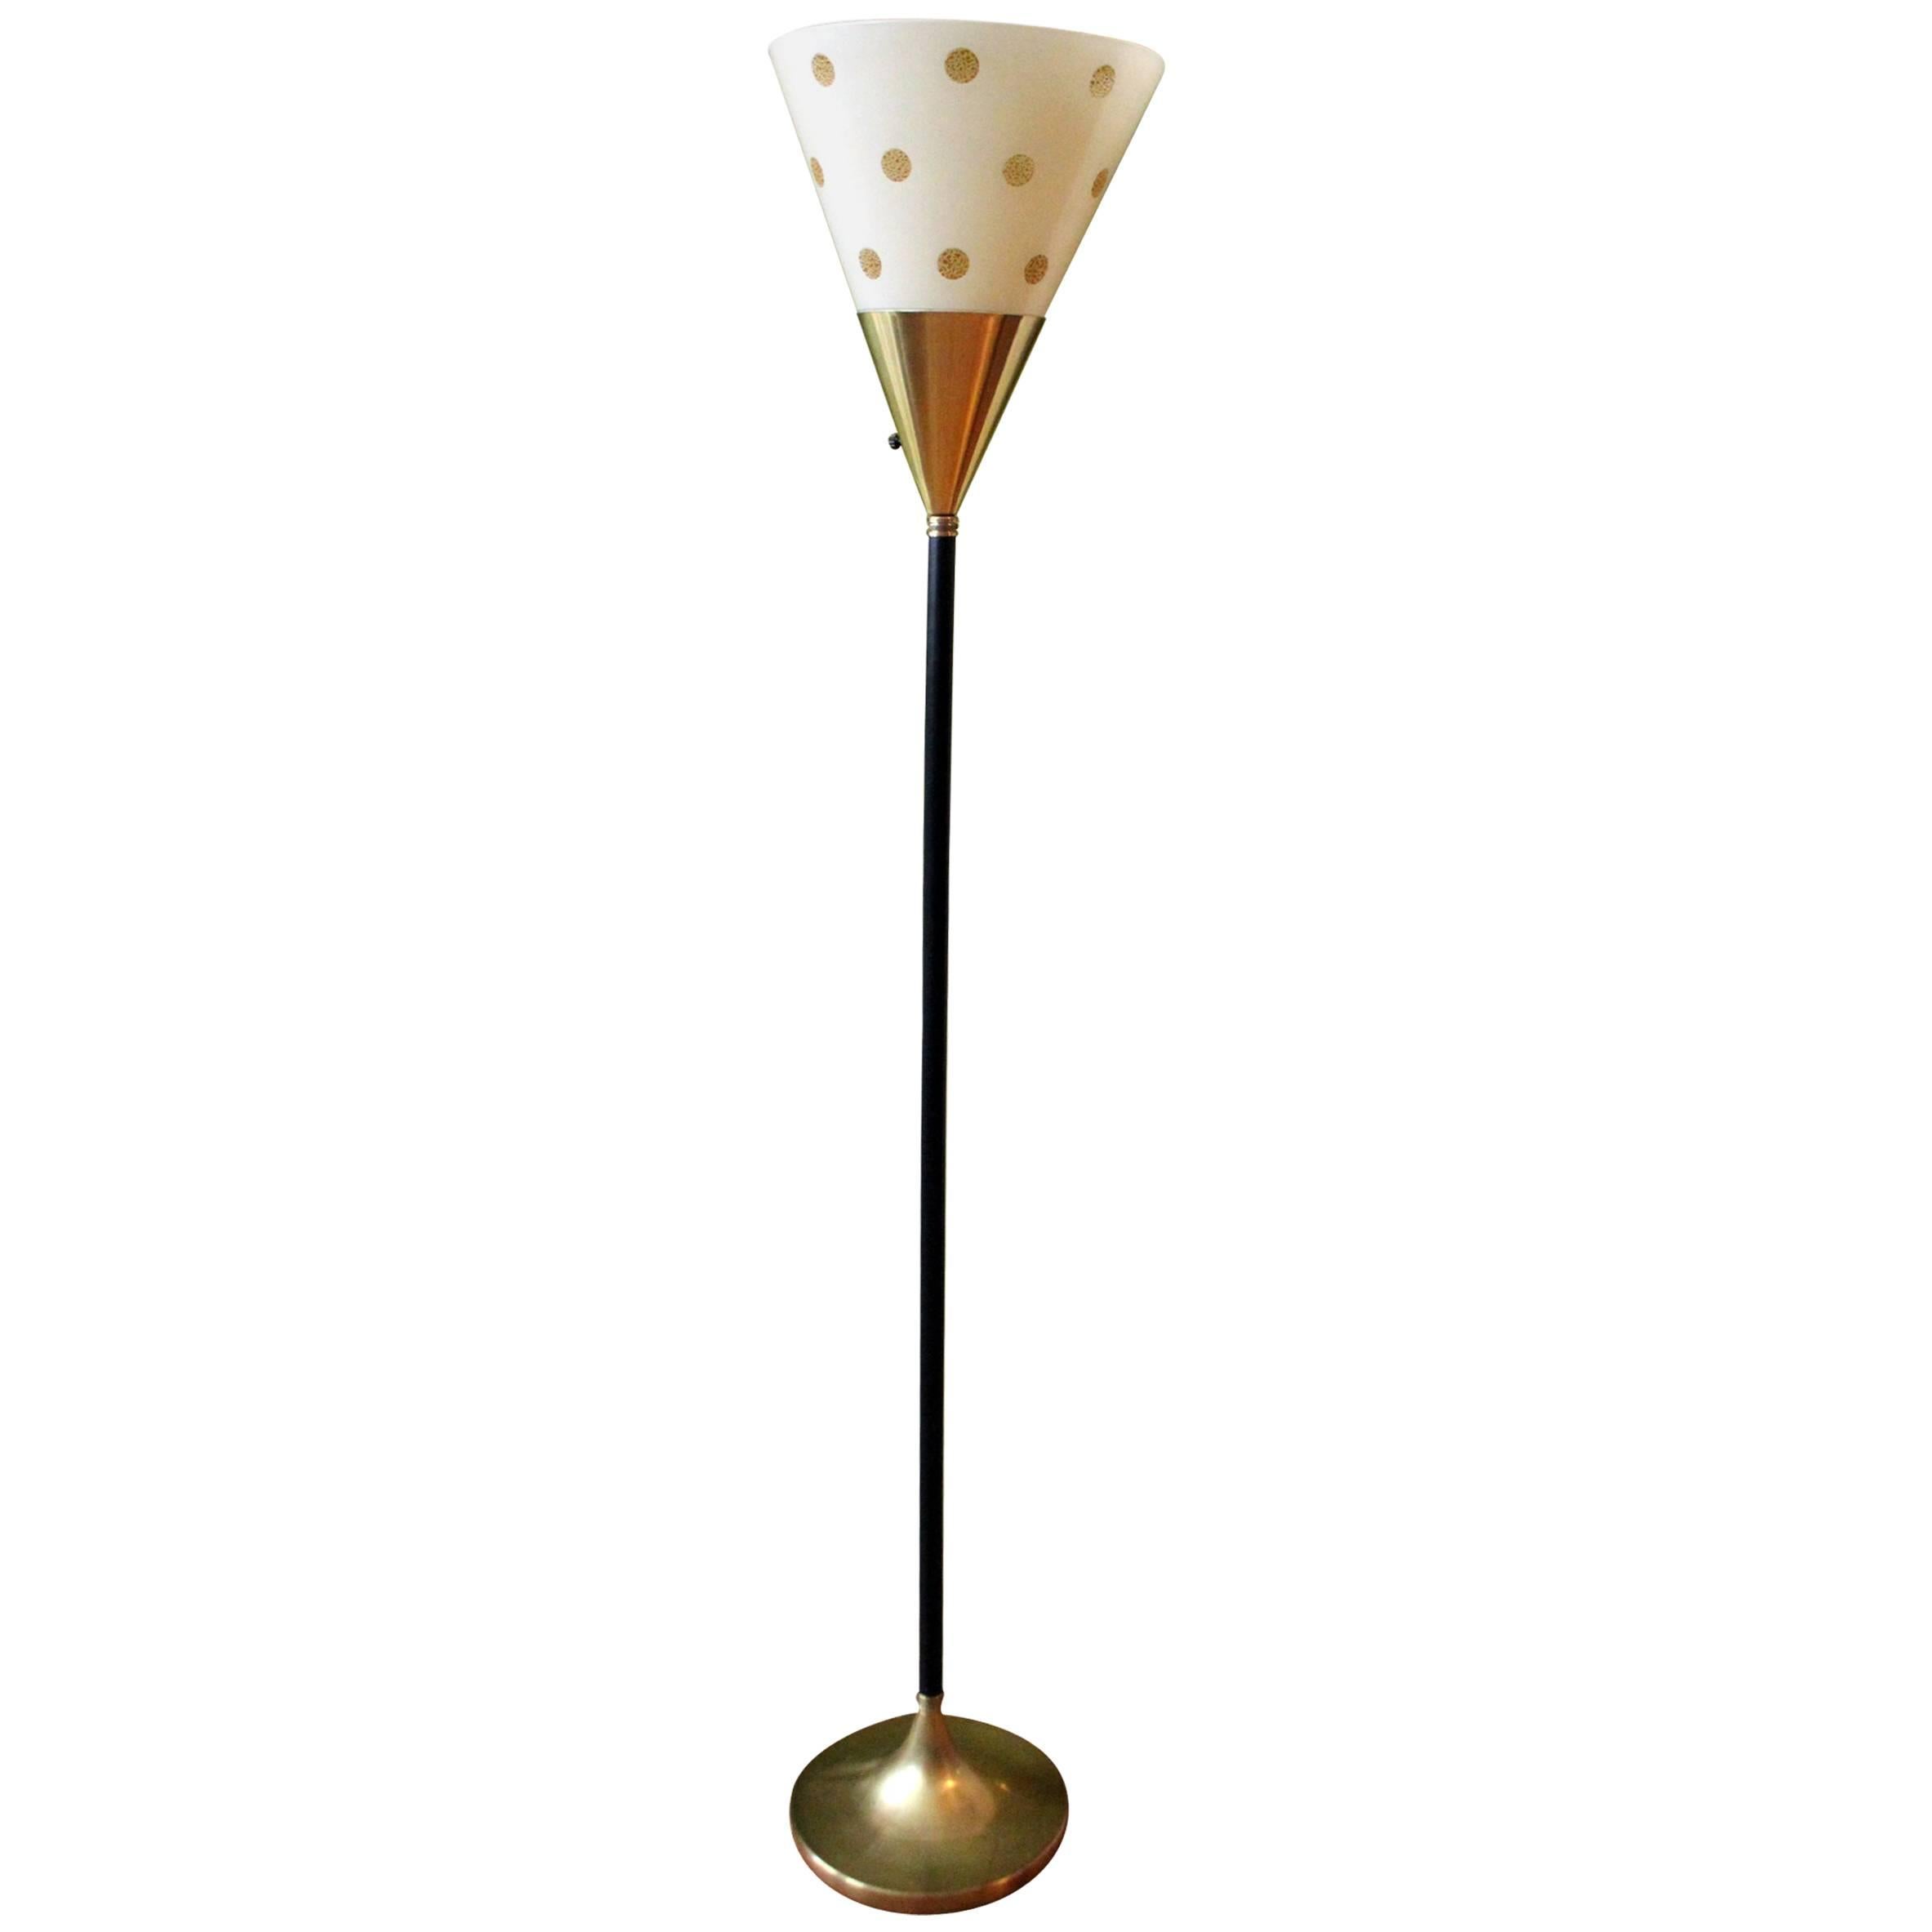 French Art Deco Torchiere Floor Lamp For Sale